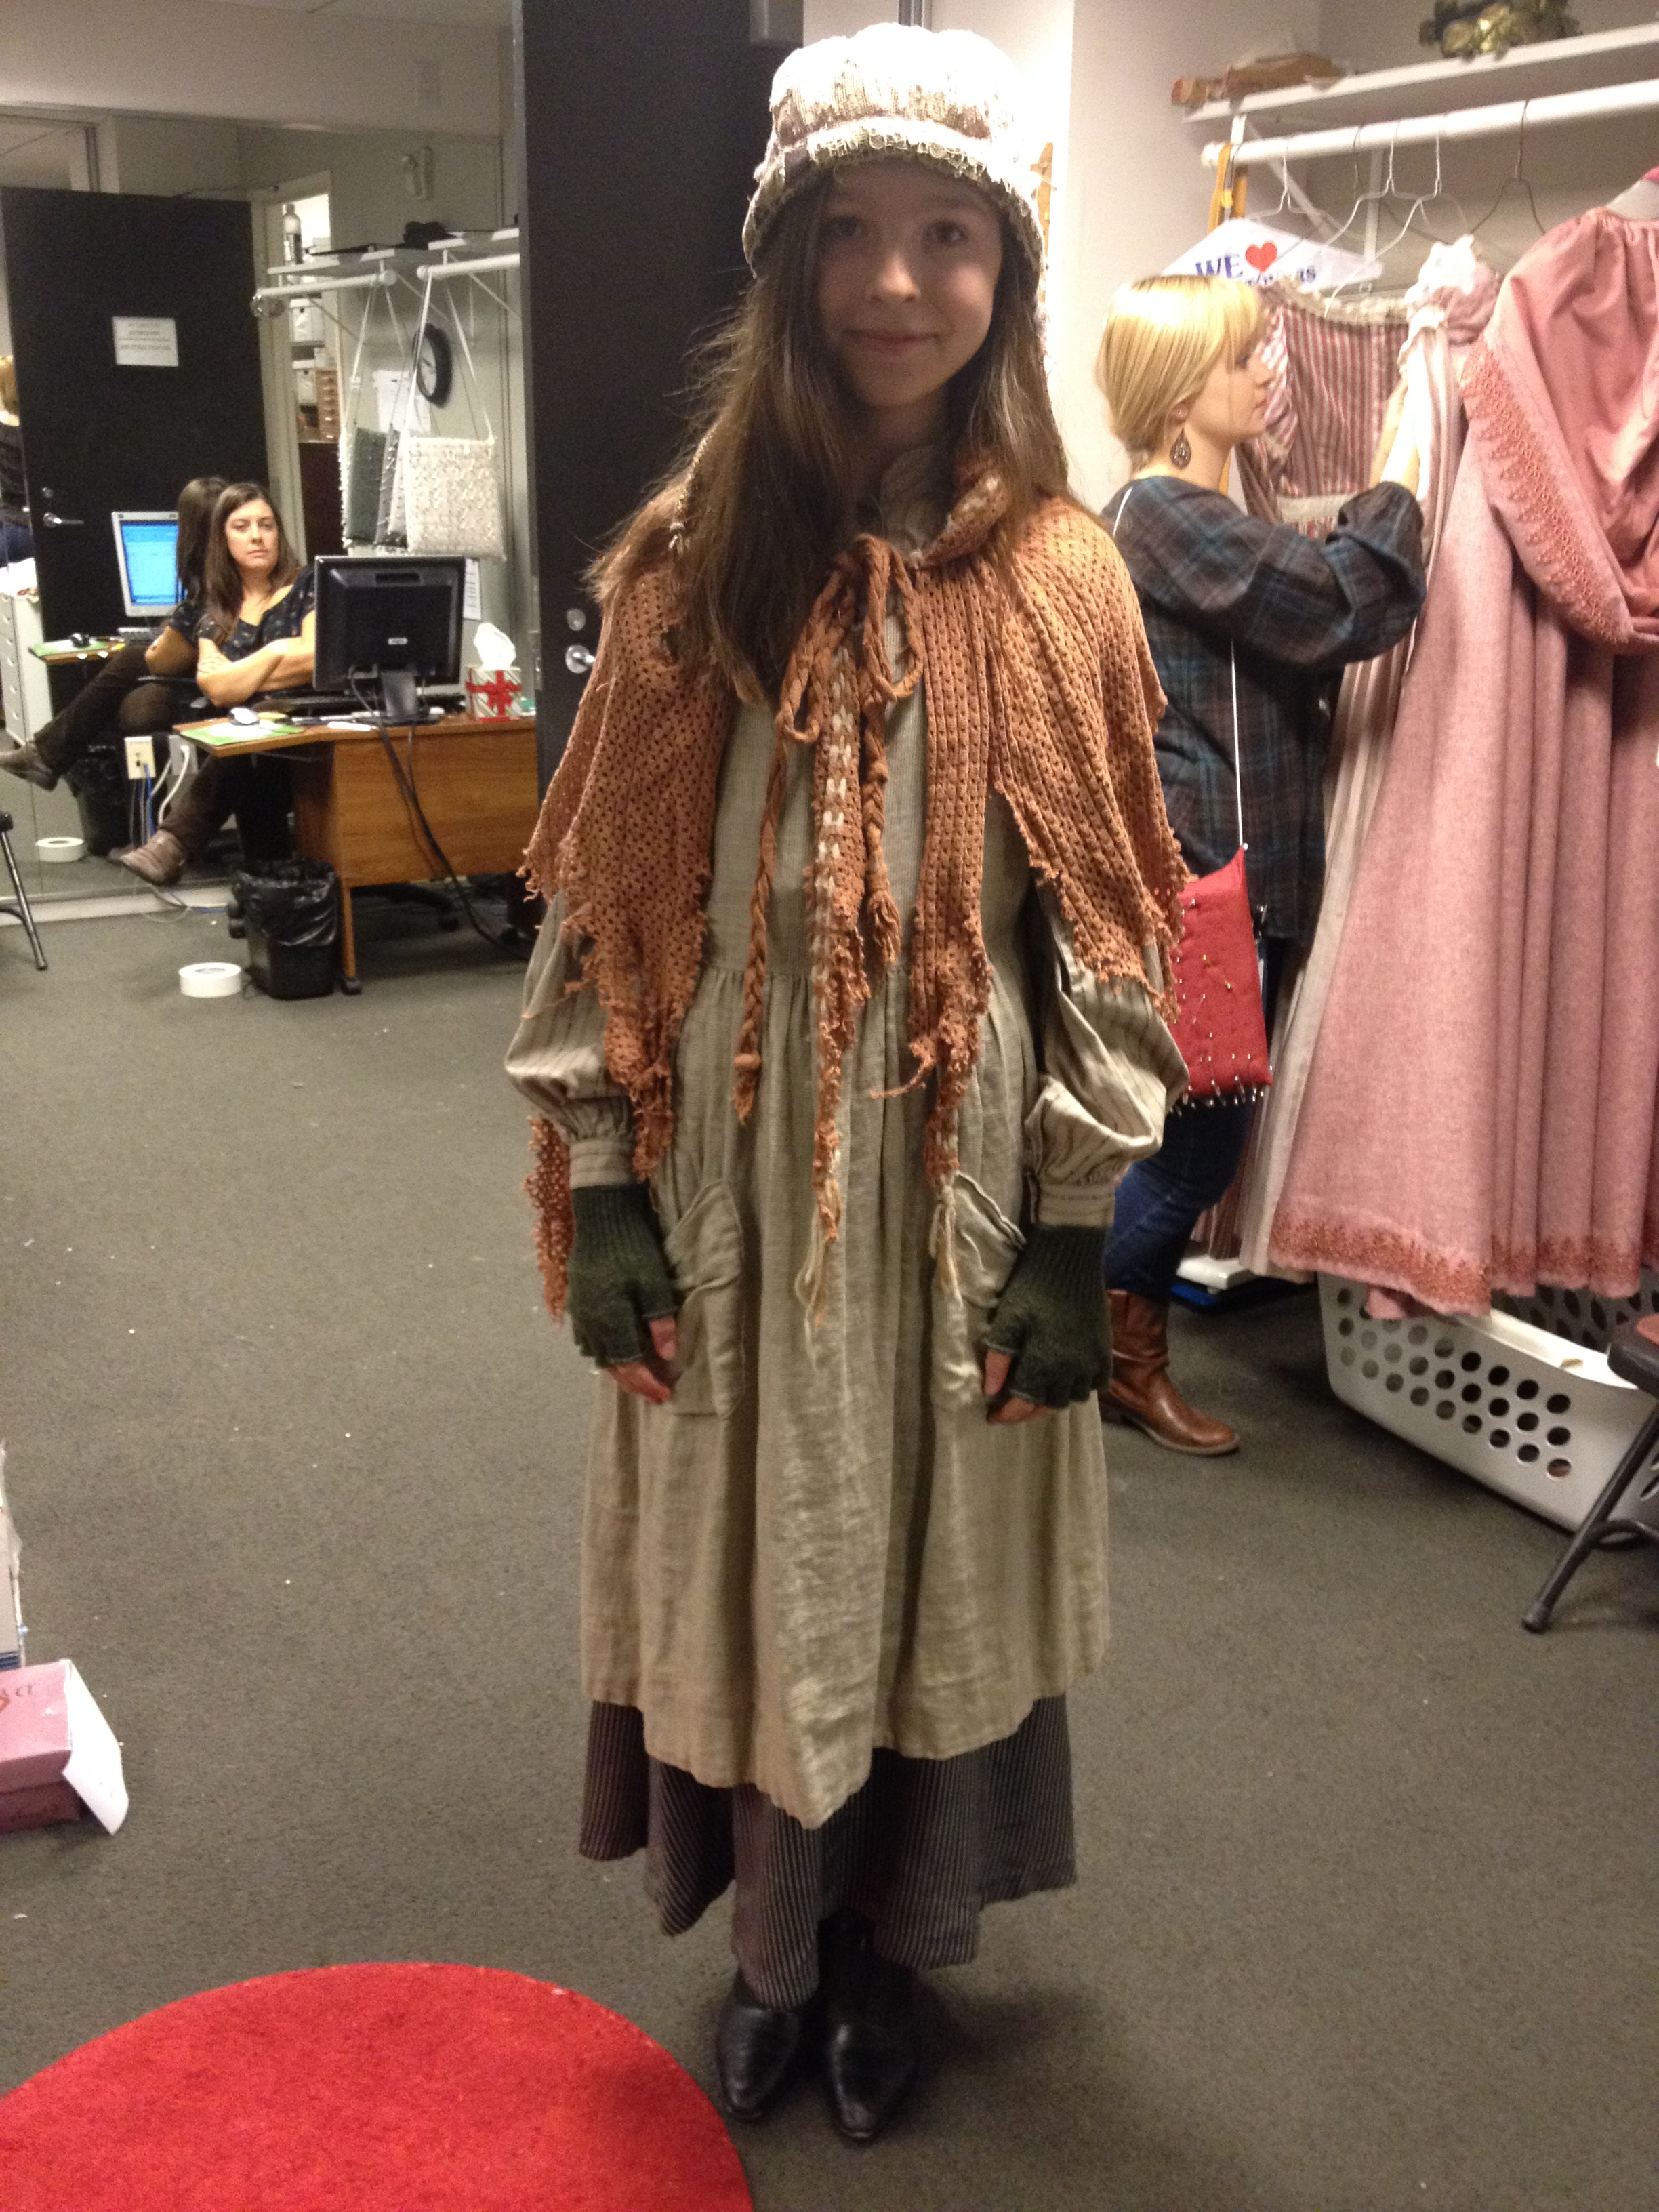 Costume fitting for 